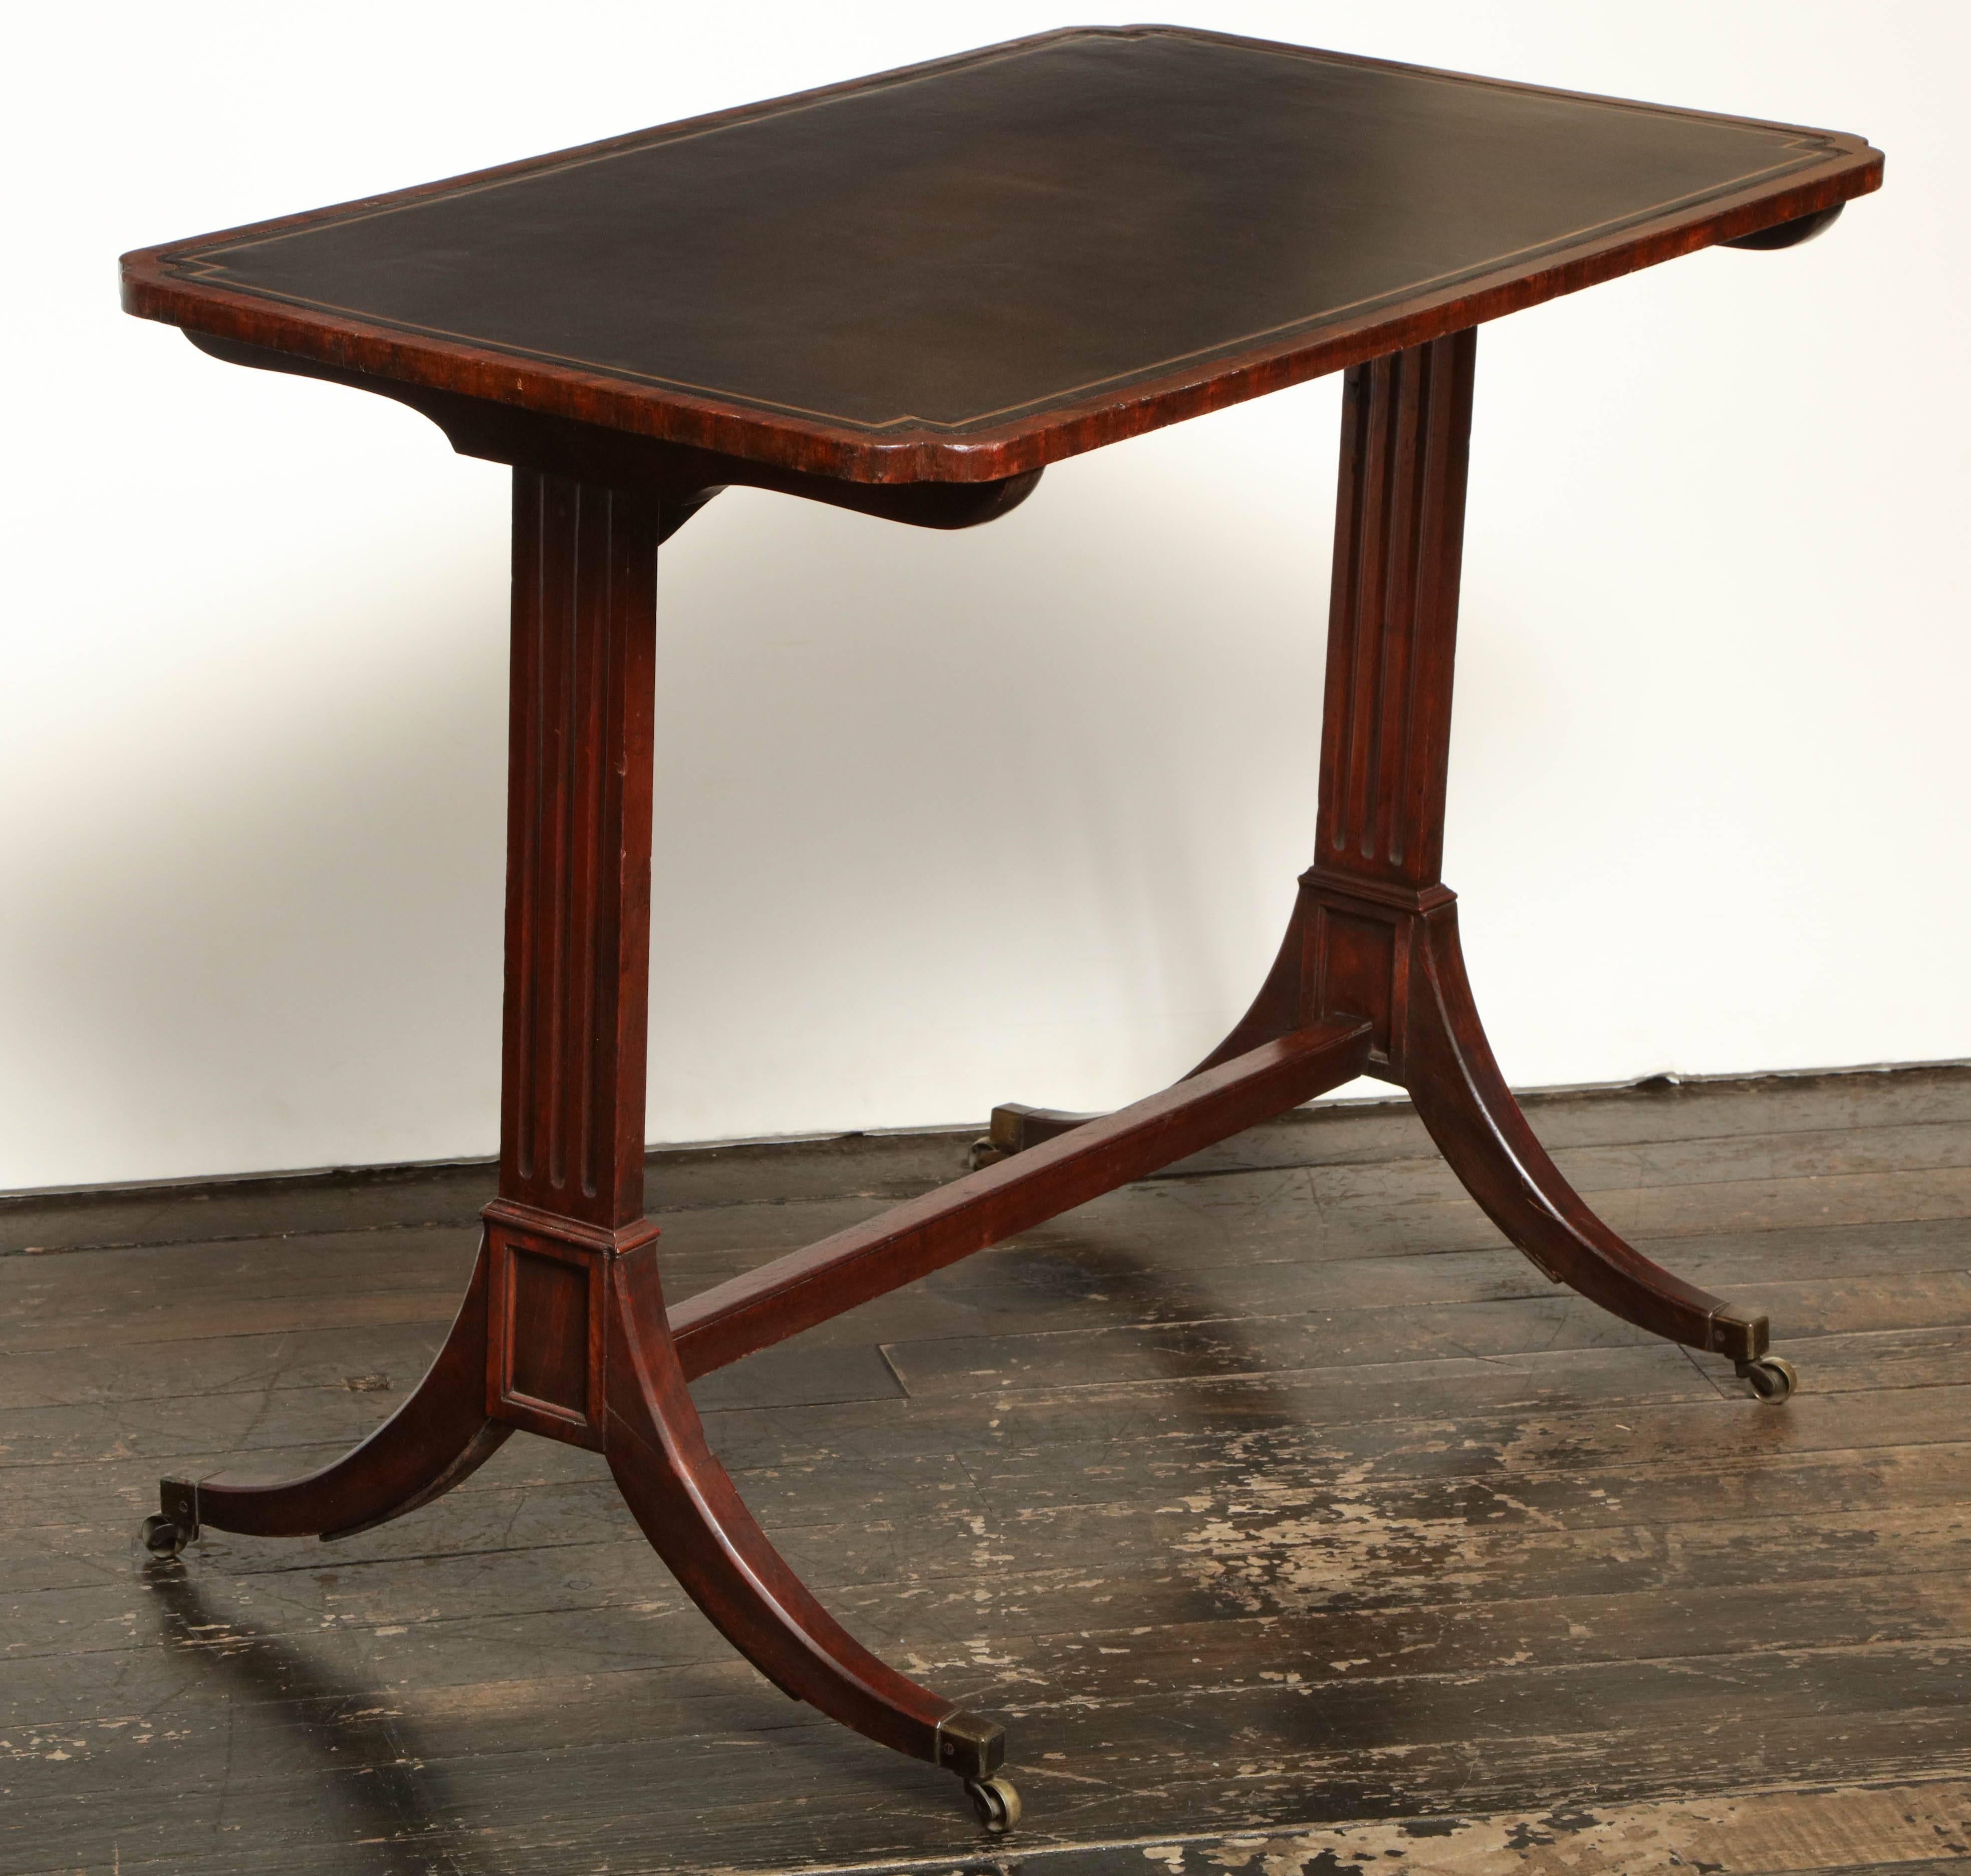 Early 19th century English Regency table or desk with leather top.